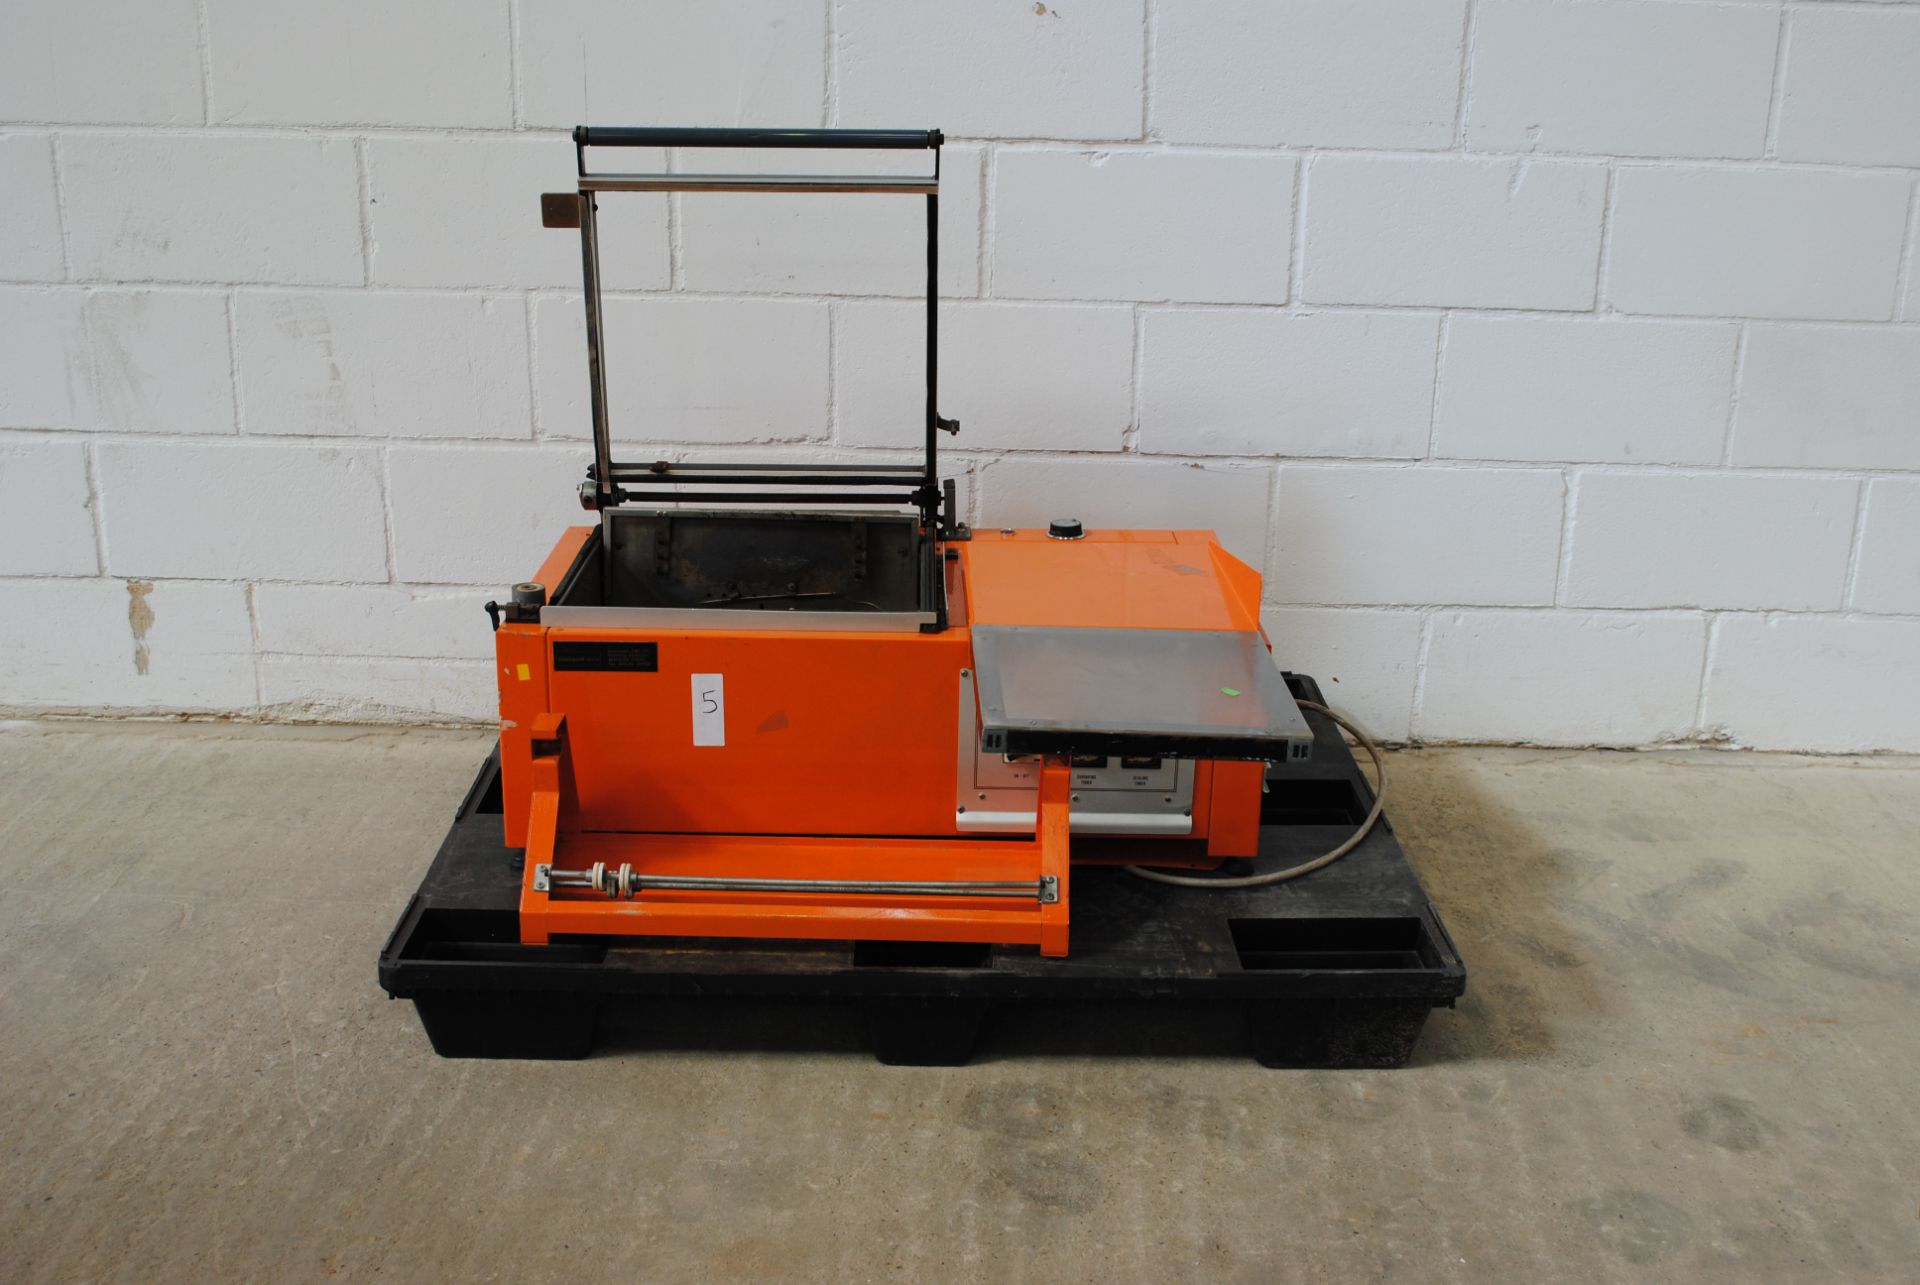 Quick Pack Ltd Model-3458 Semi Automatic Shrink Wrapping Machine Min:75 V.220/240 IPH KW-3.25 HZ.